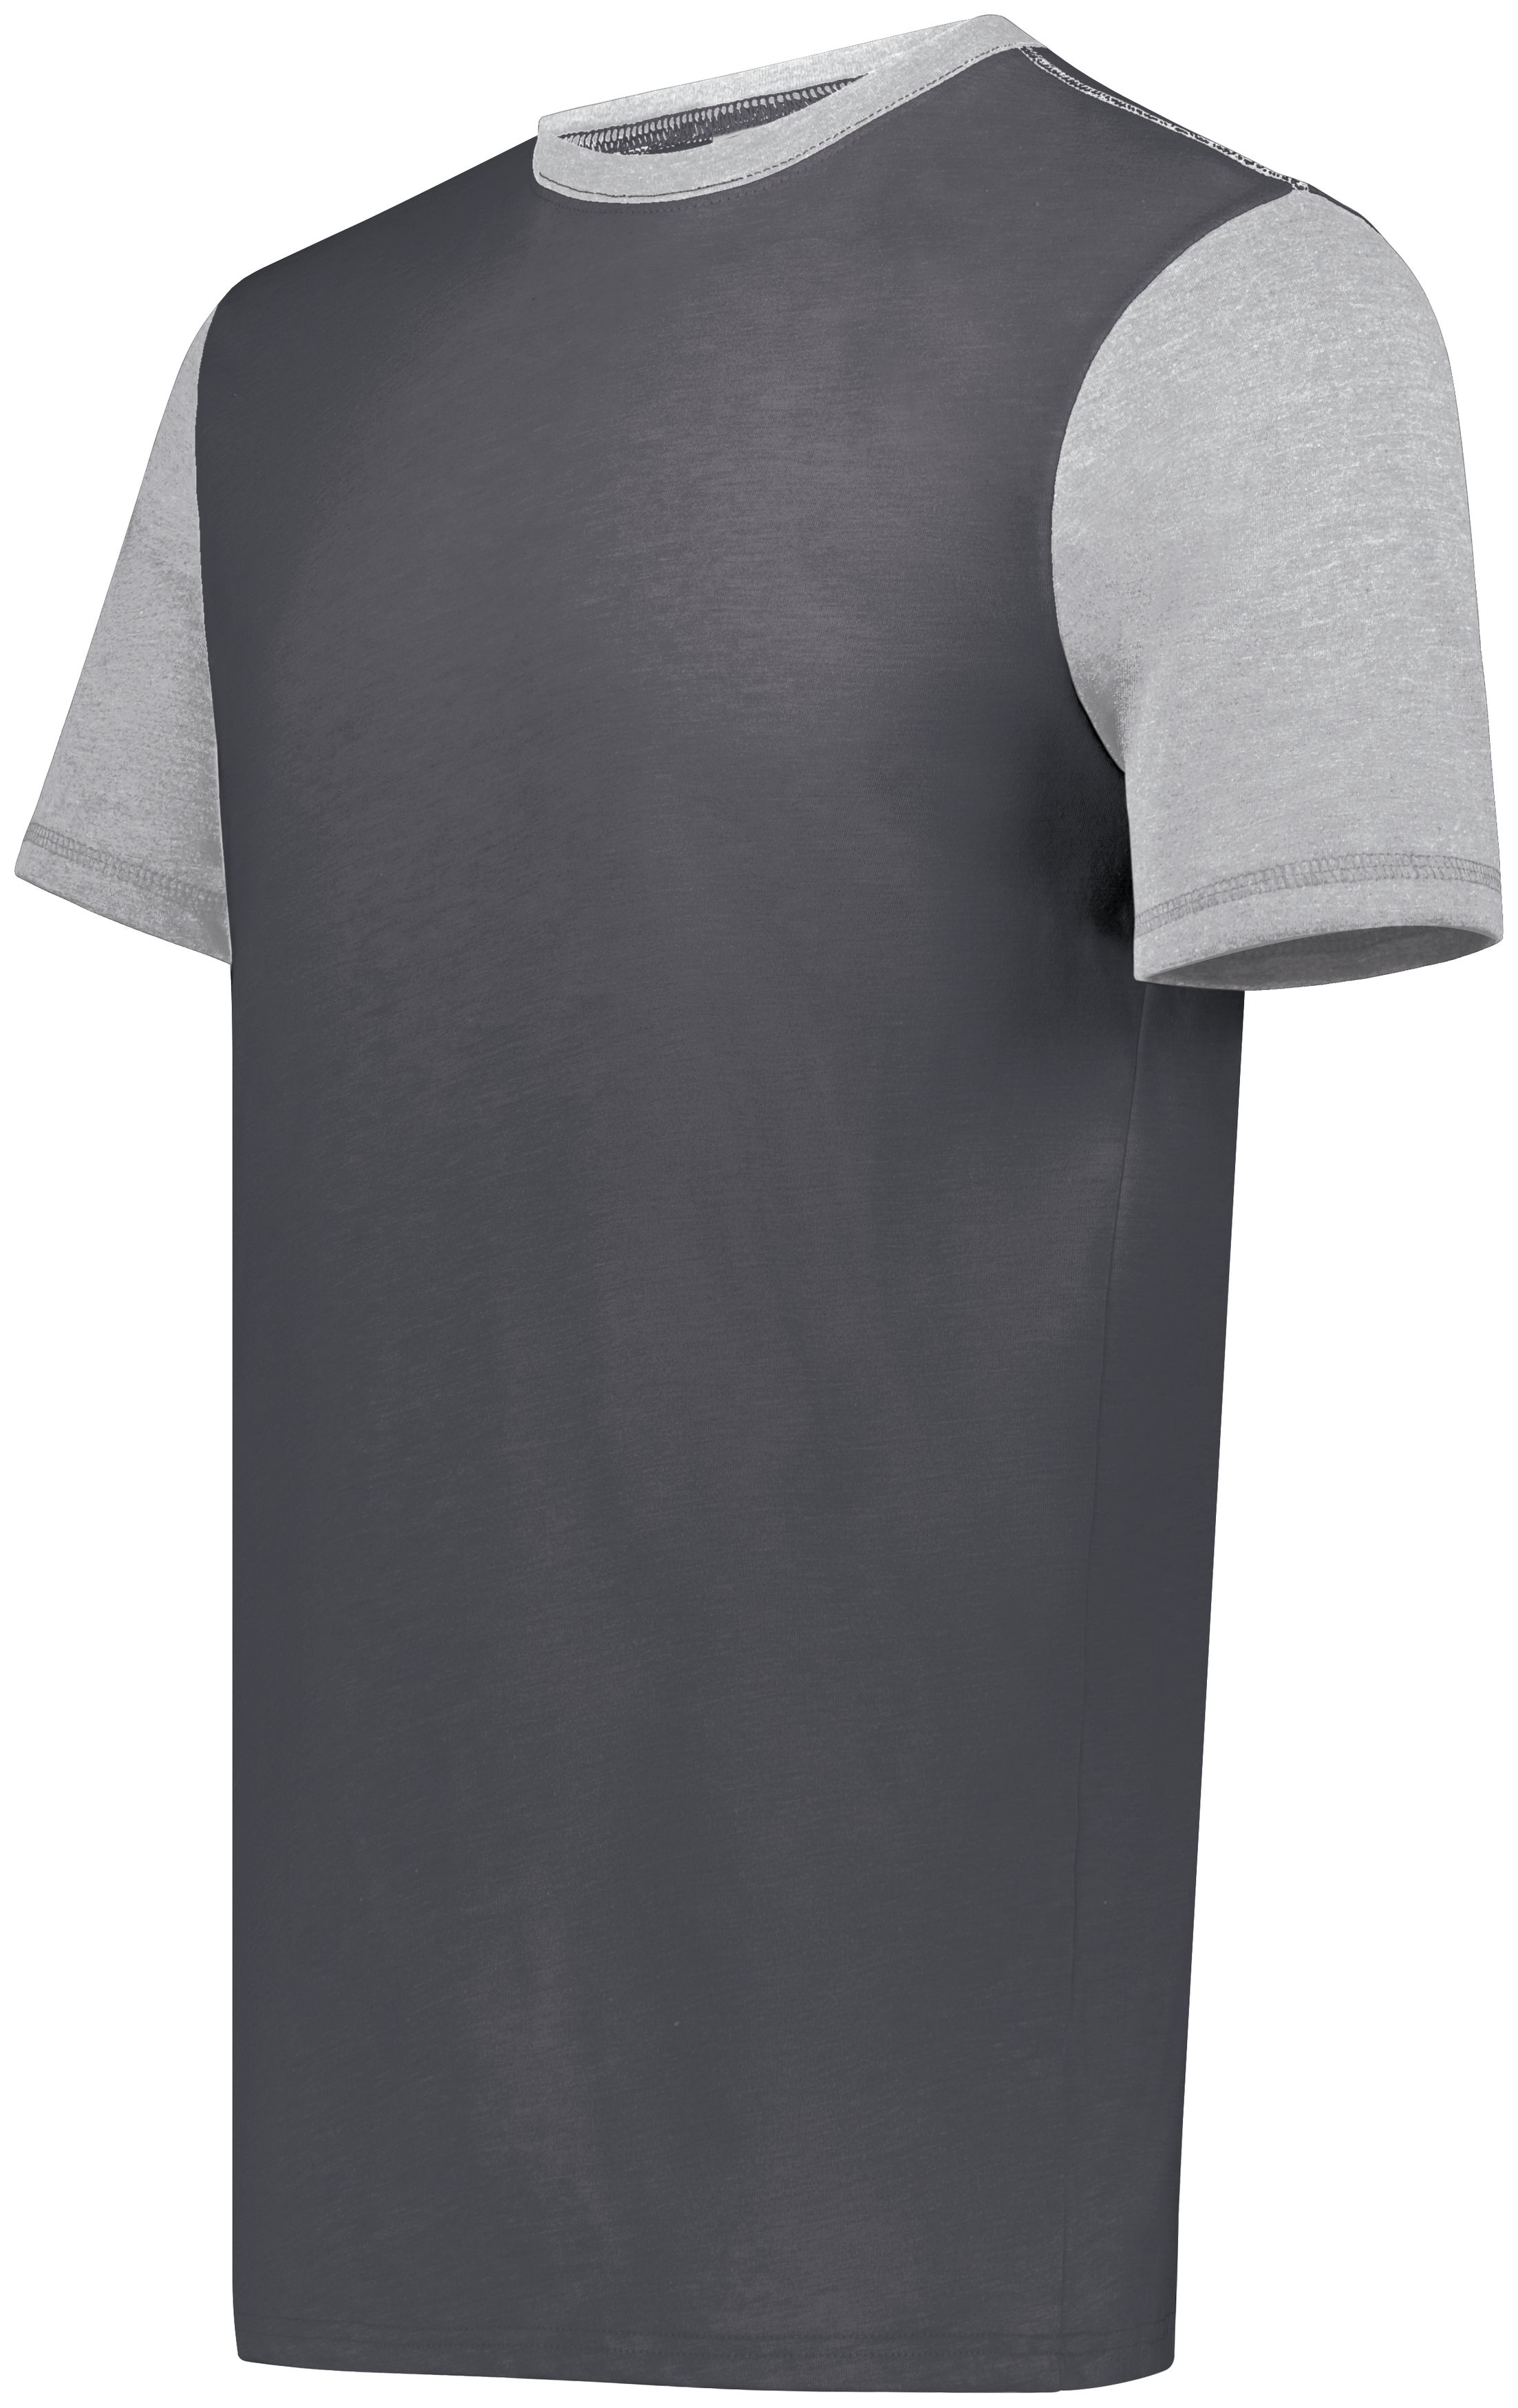 click to view Carbon Heather/Grey Heather